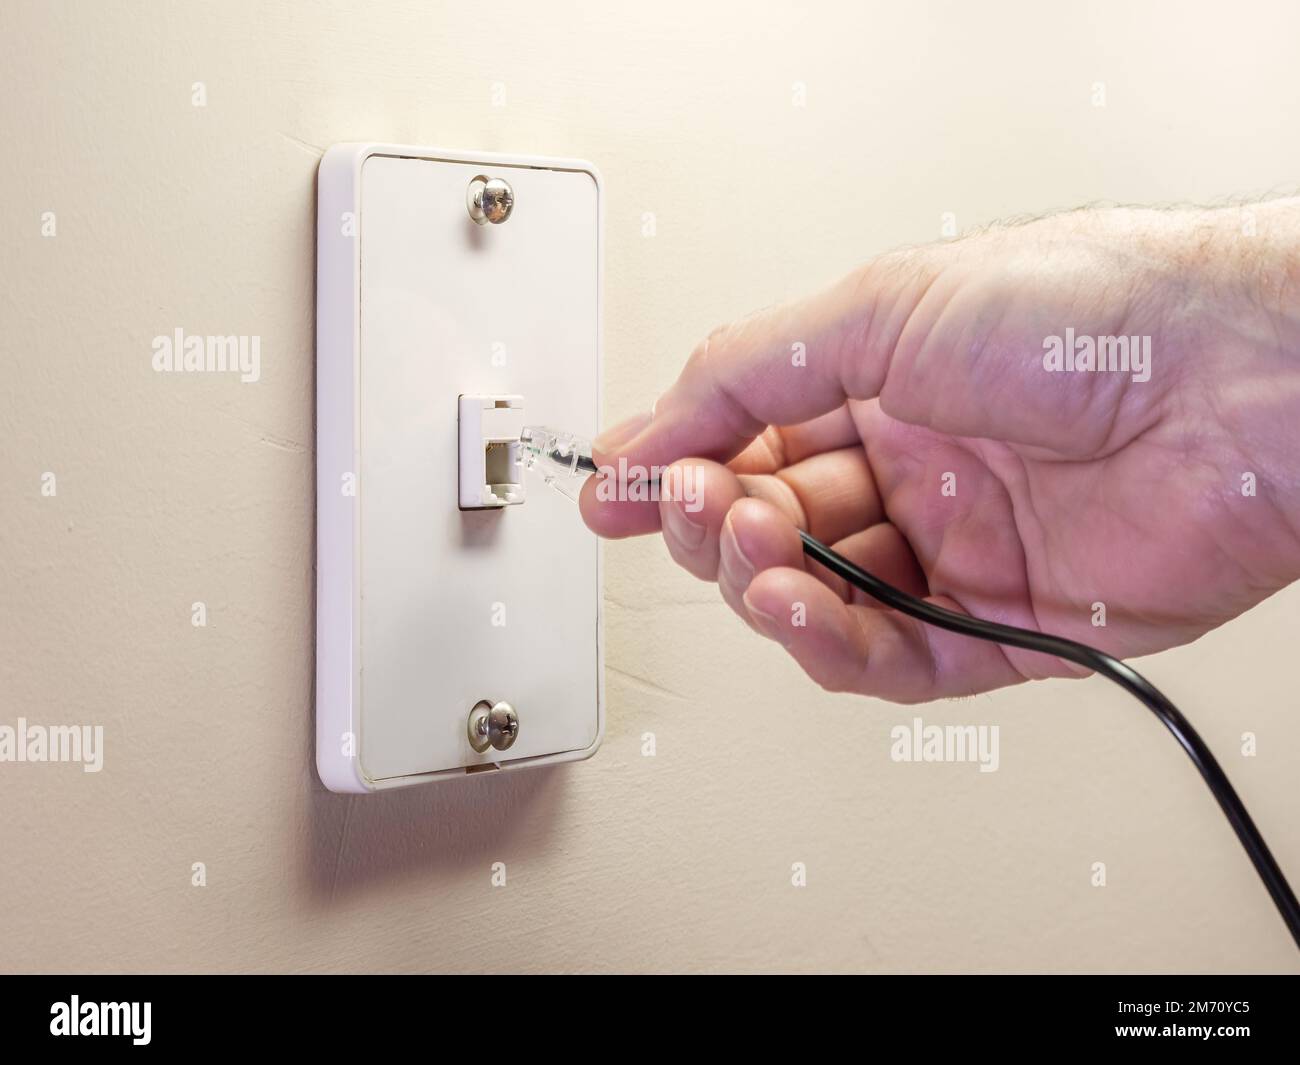 Male electrician plugging in landline telephone cord into wall mounted jack plate. Stock Photo